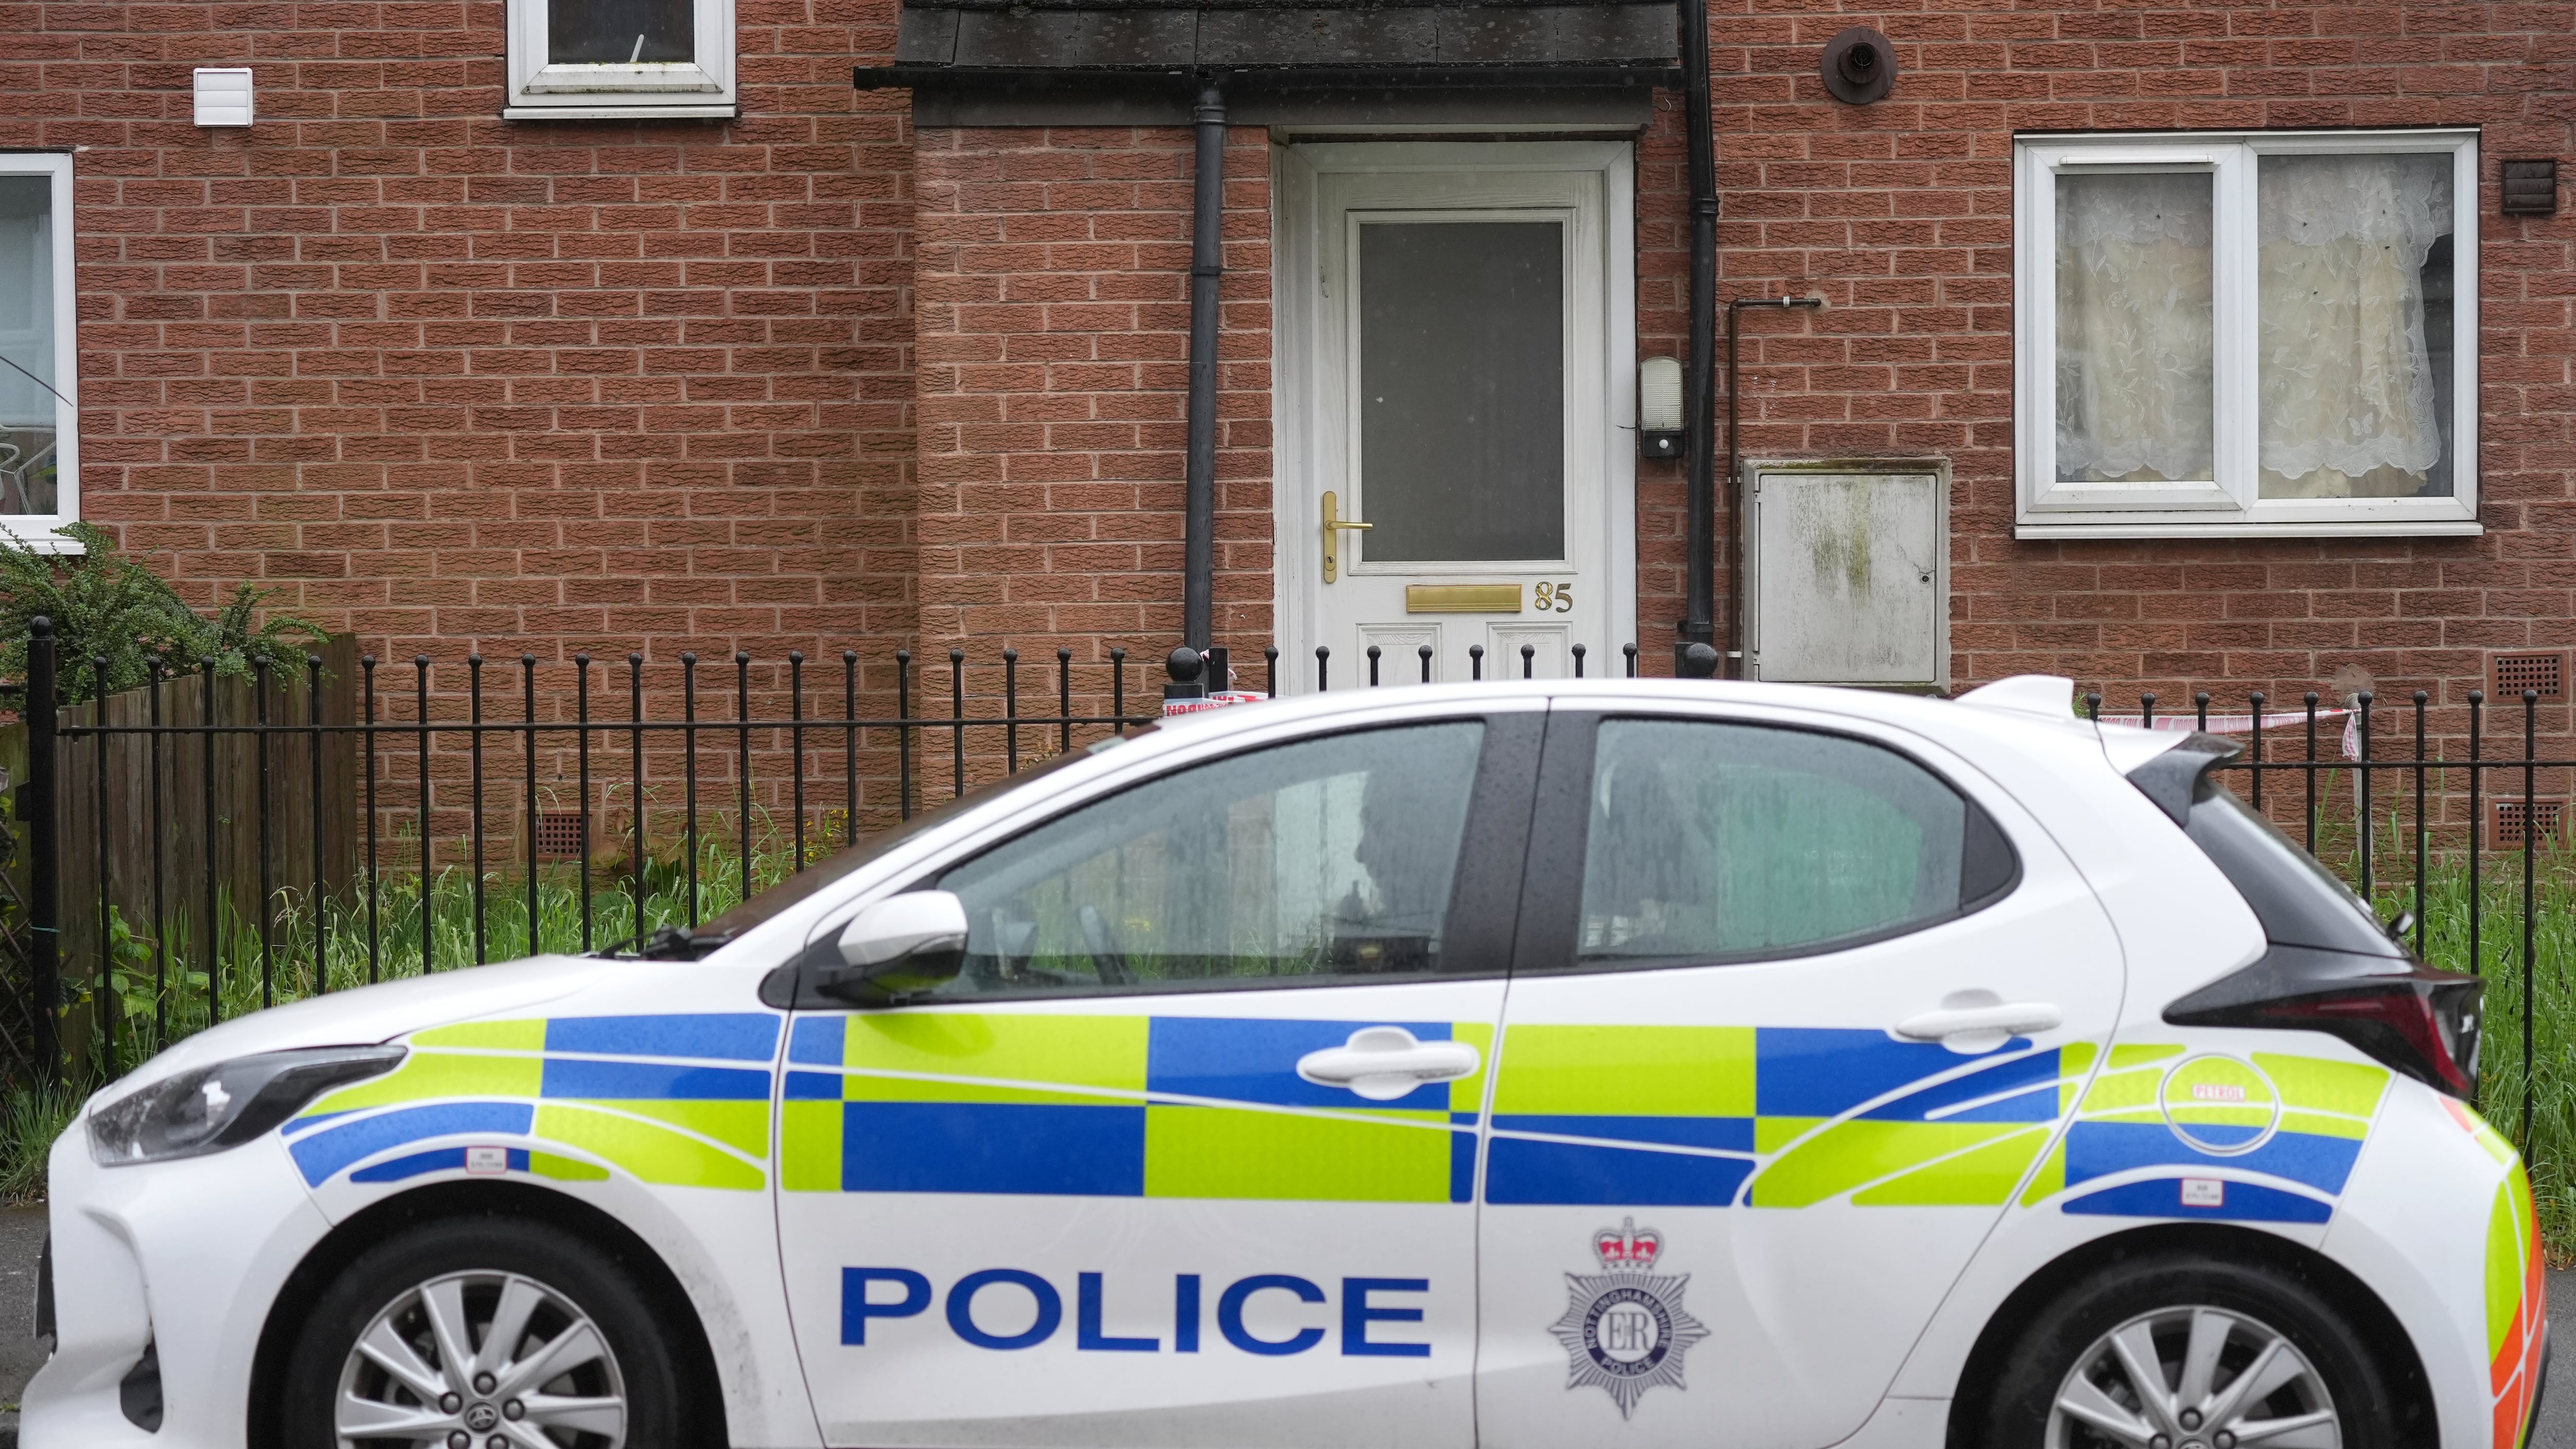 Police have said the deaths of two women at a house in Radford, Nottingham, are not believed to be suspicious